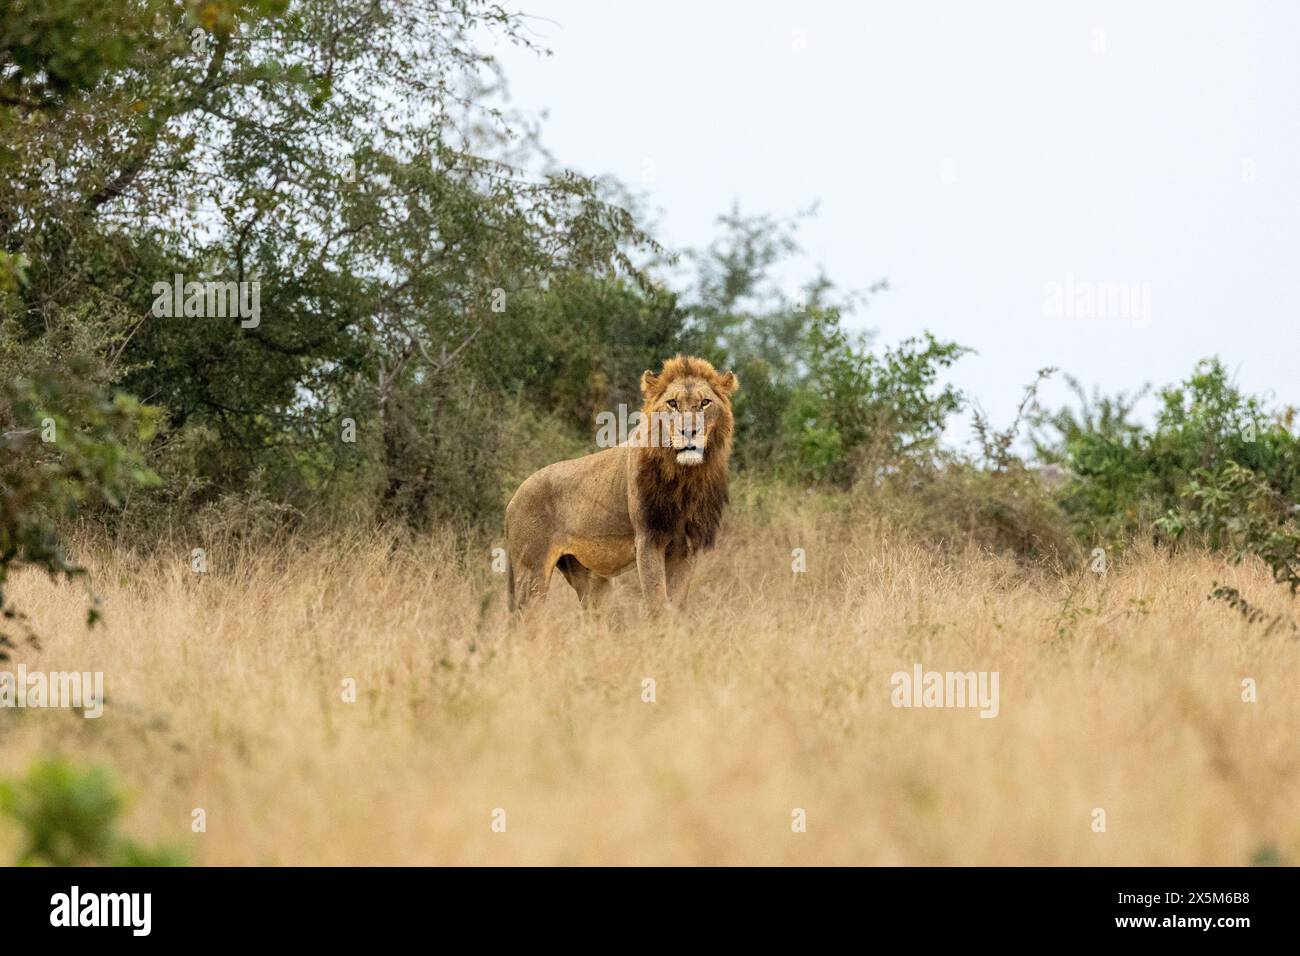 A male Lion, Panthera leo, standing in grass, wide angle shot. Stock Photo